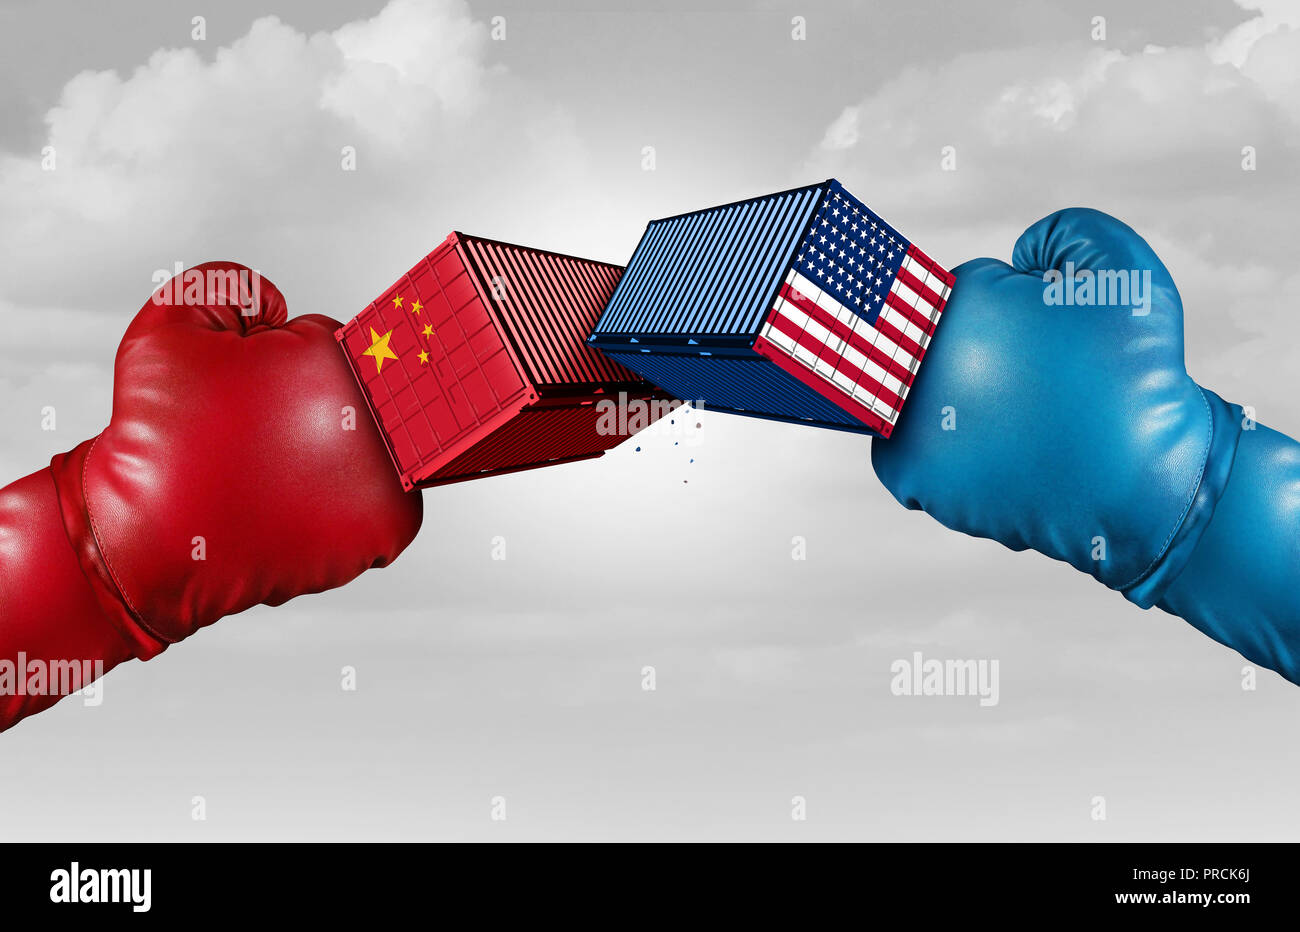 Trade war China US or United States economy and American tariffs conflict with two opposing trading partners as an economic import and exports. Stock Photo